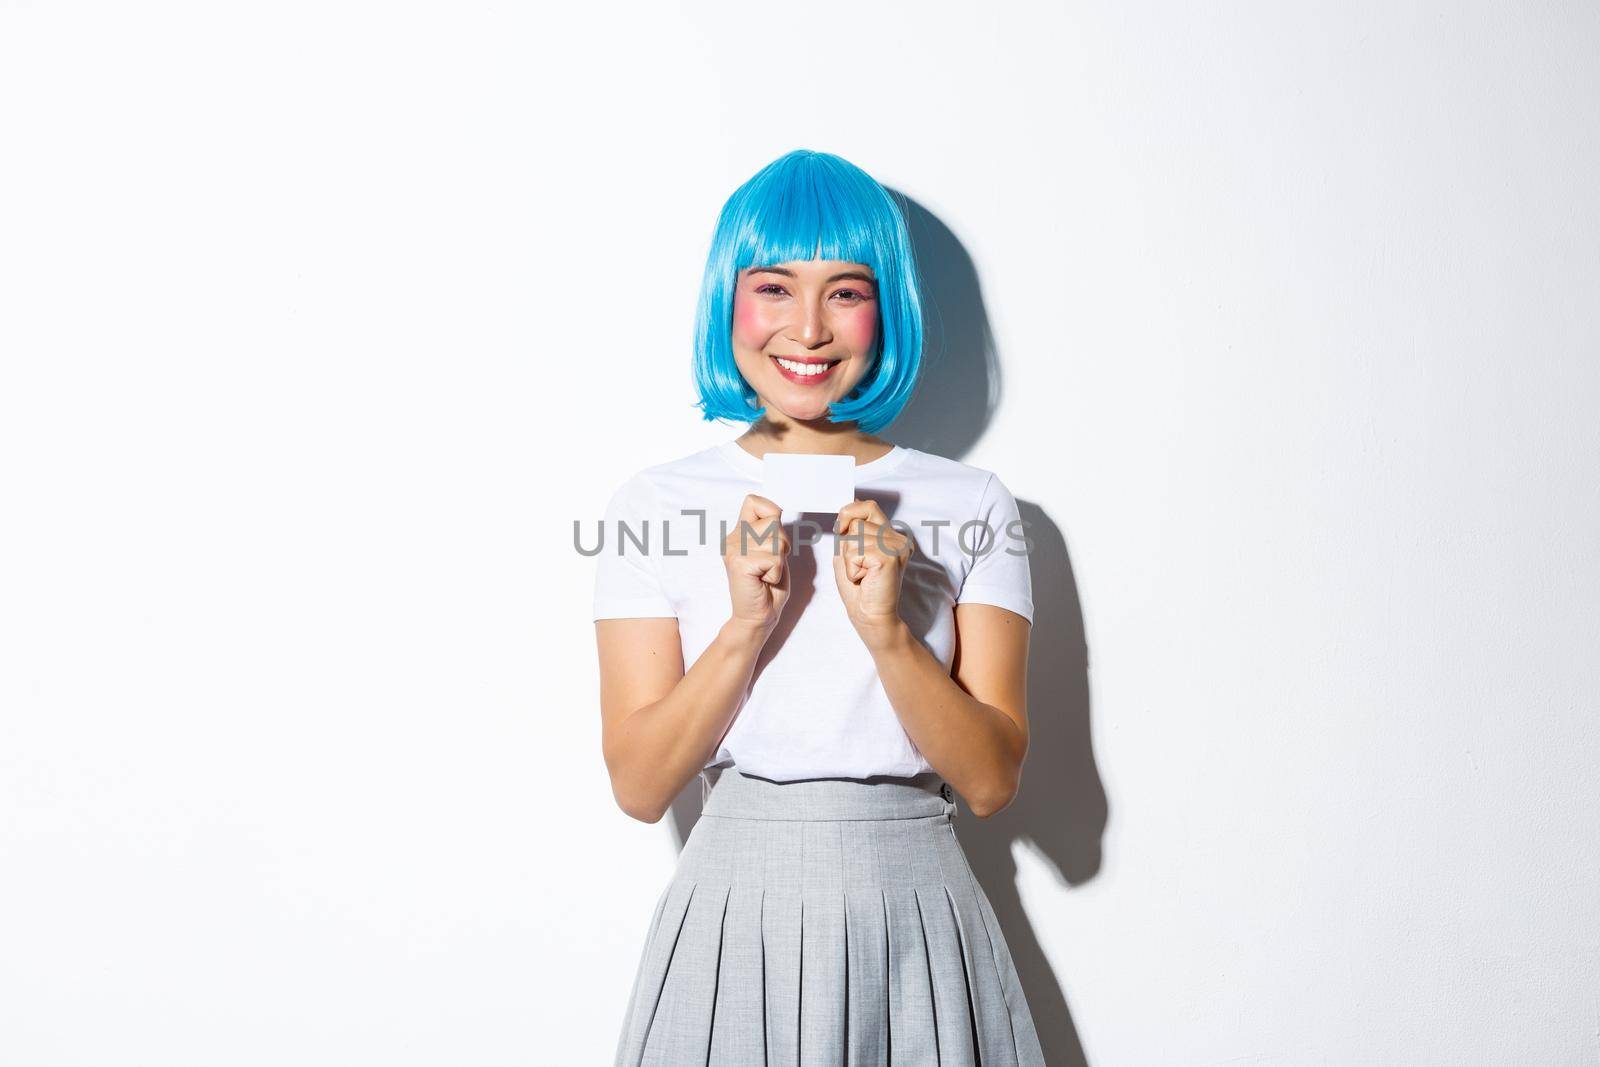 Portrait of cute asian girl in blue wig showing credit card, smiling happy, standing over white background.